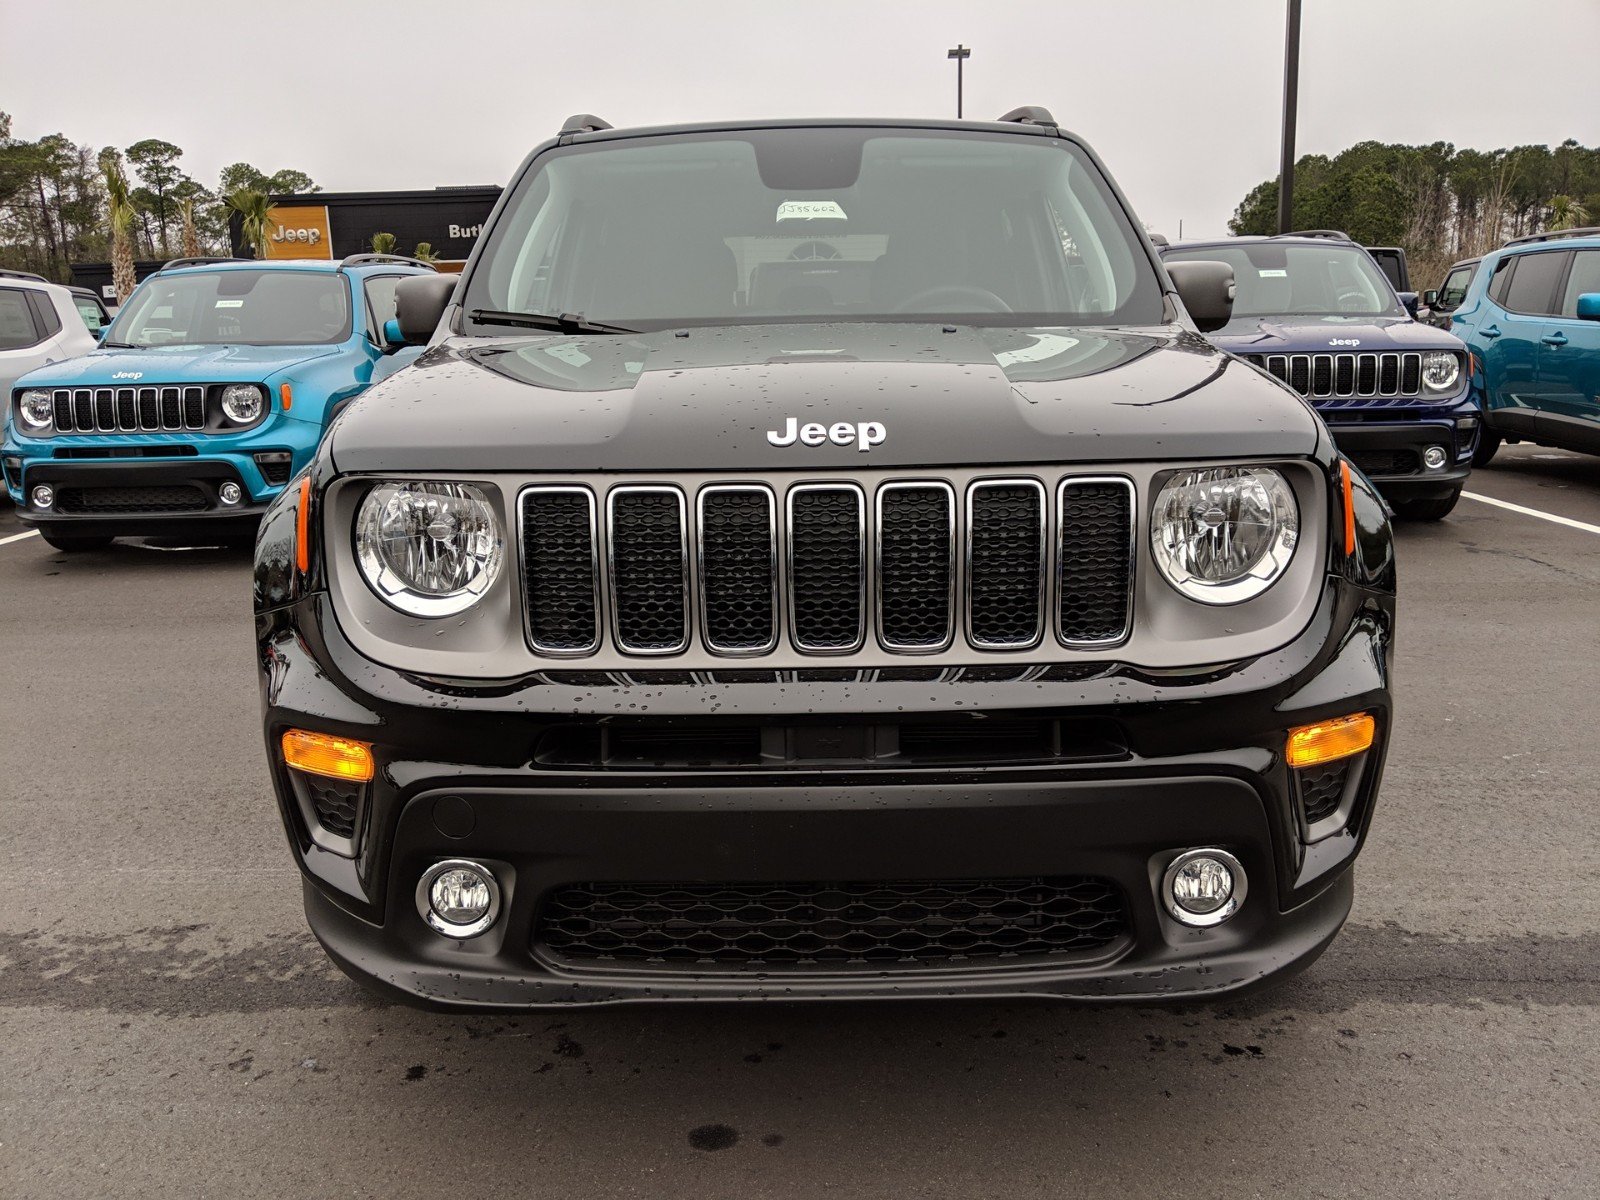 New 2019 Jeep Renegade Limited 4d Sport Utility In Beaufort Jj85602